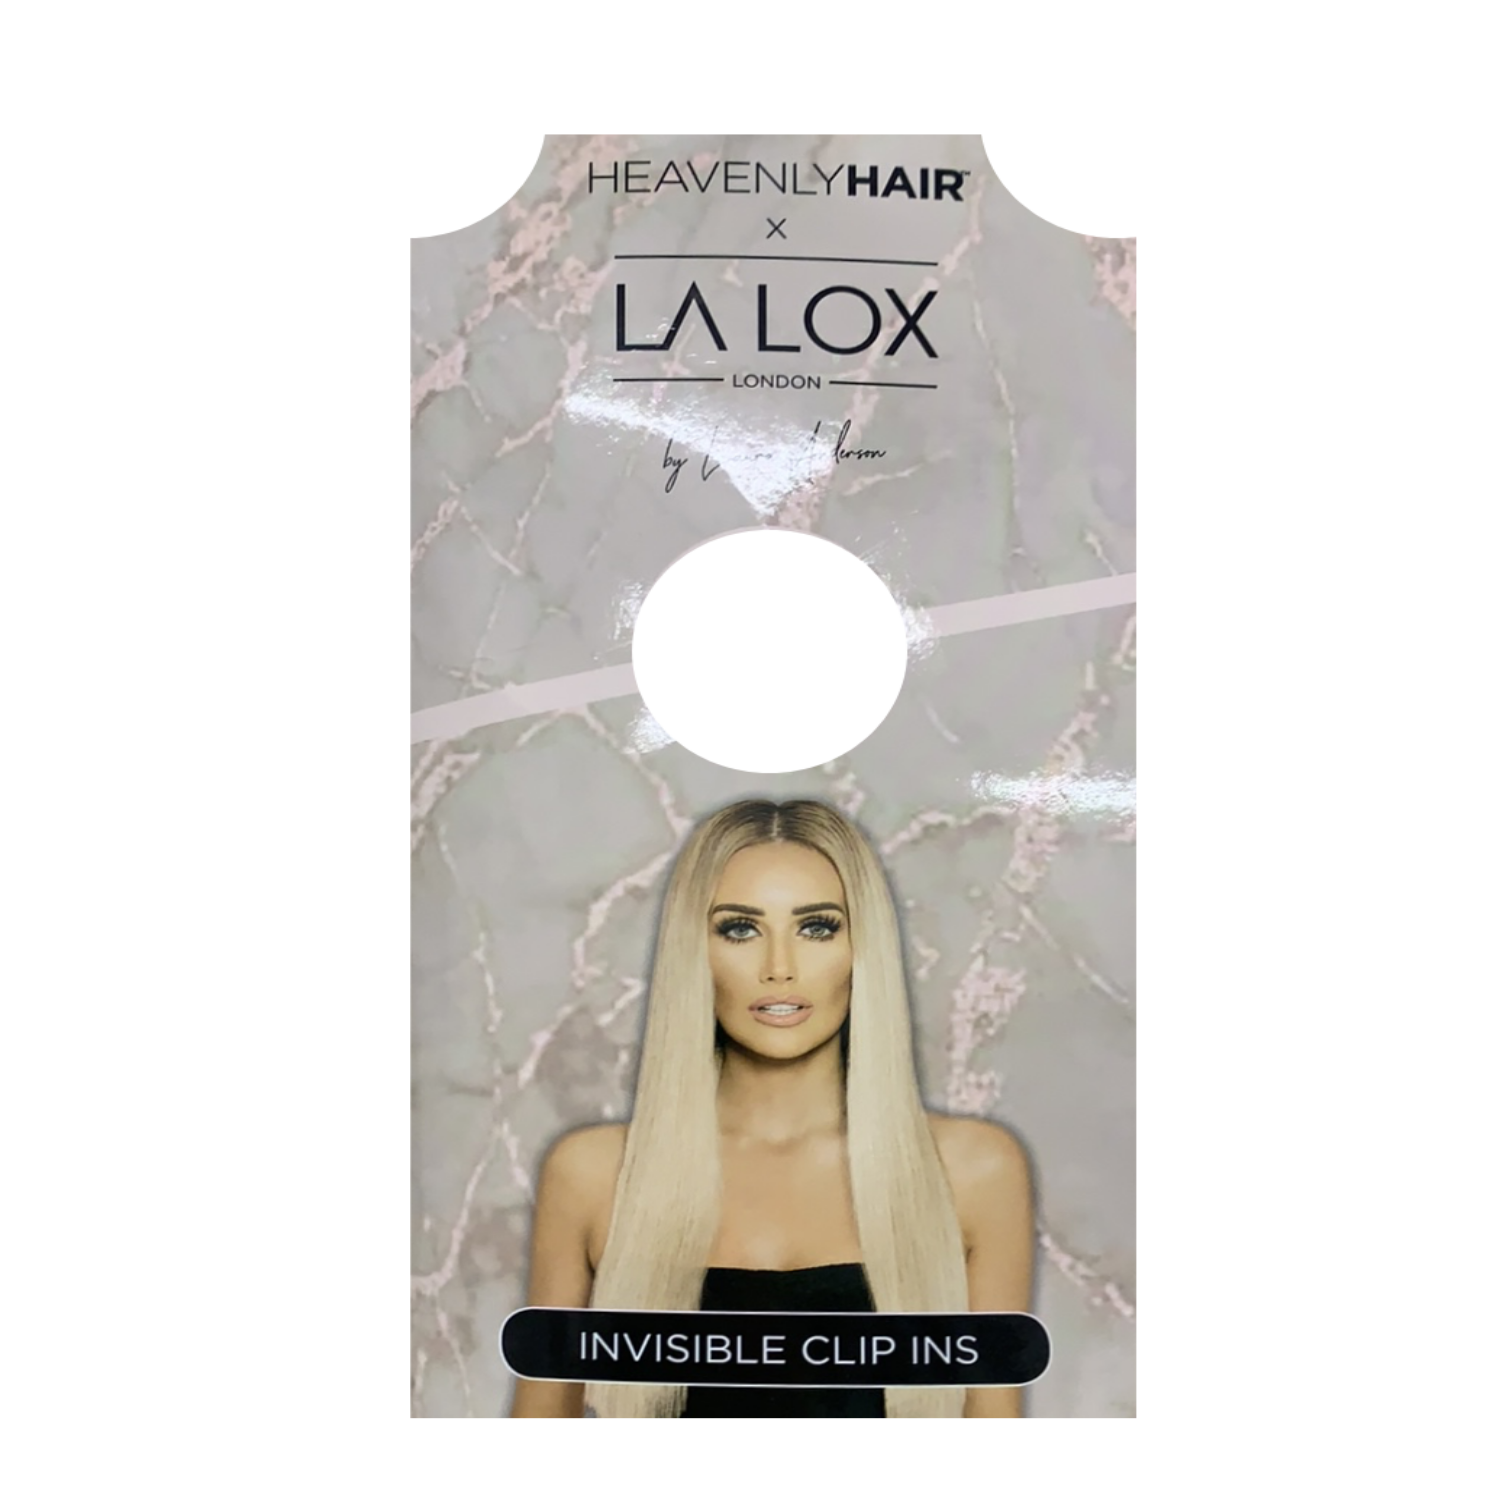 Heavenly Hair LA LOX Invisible Clip In Hair Extensions - Sandy Beach – I  Myself & Me